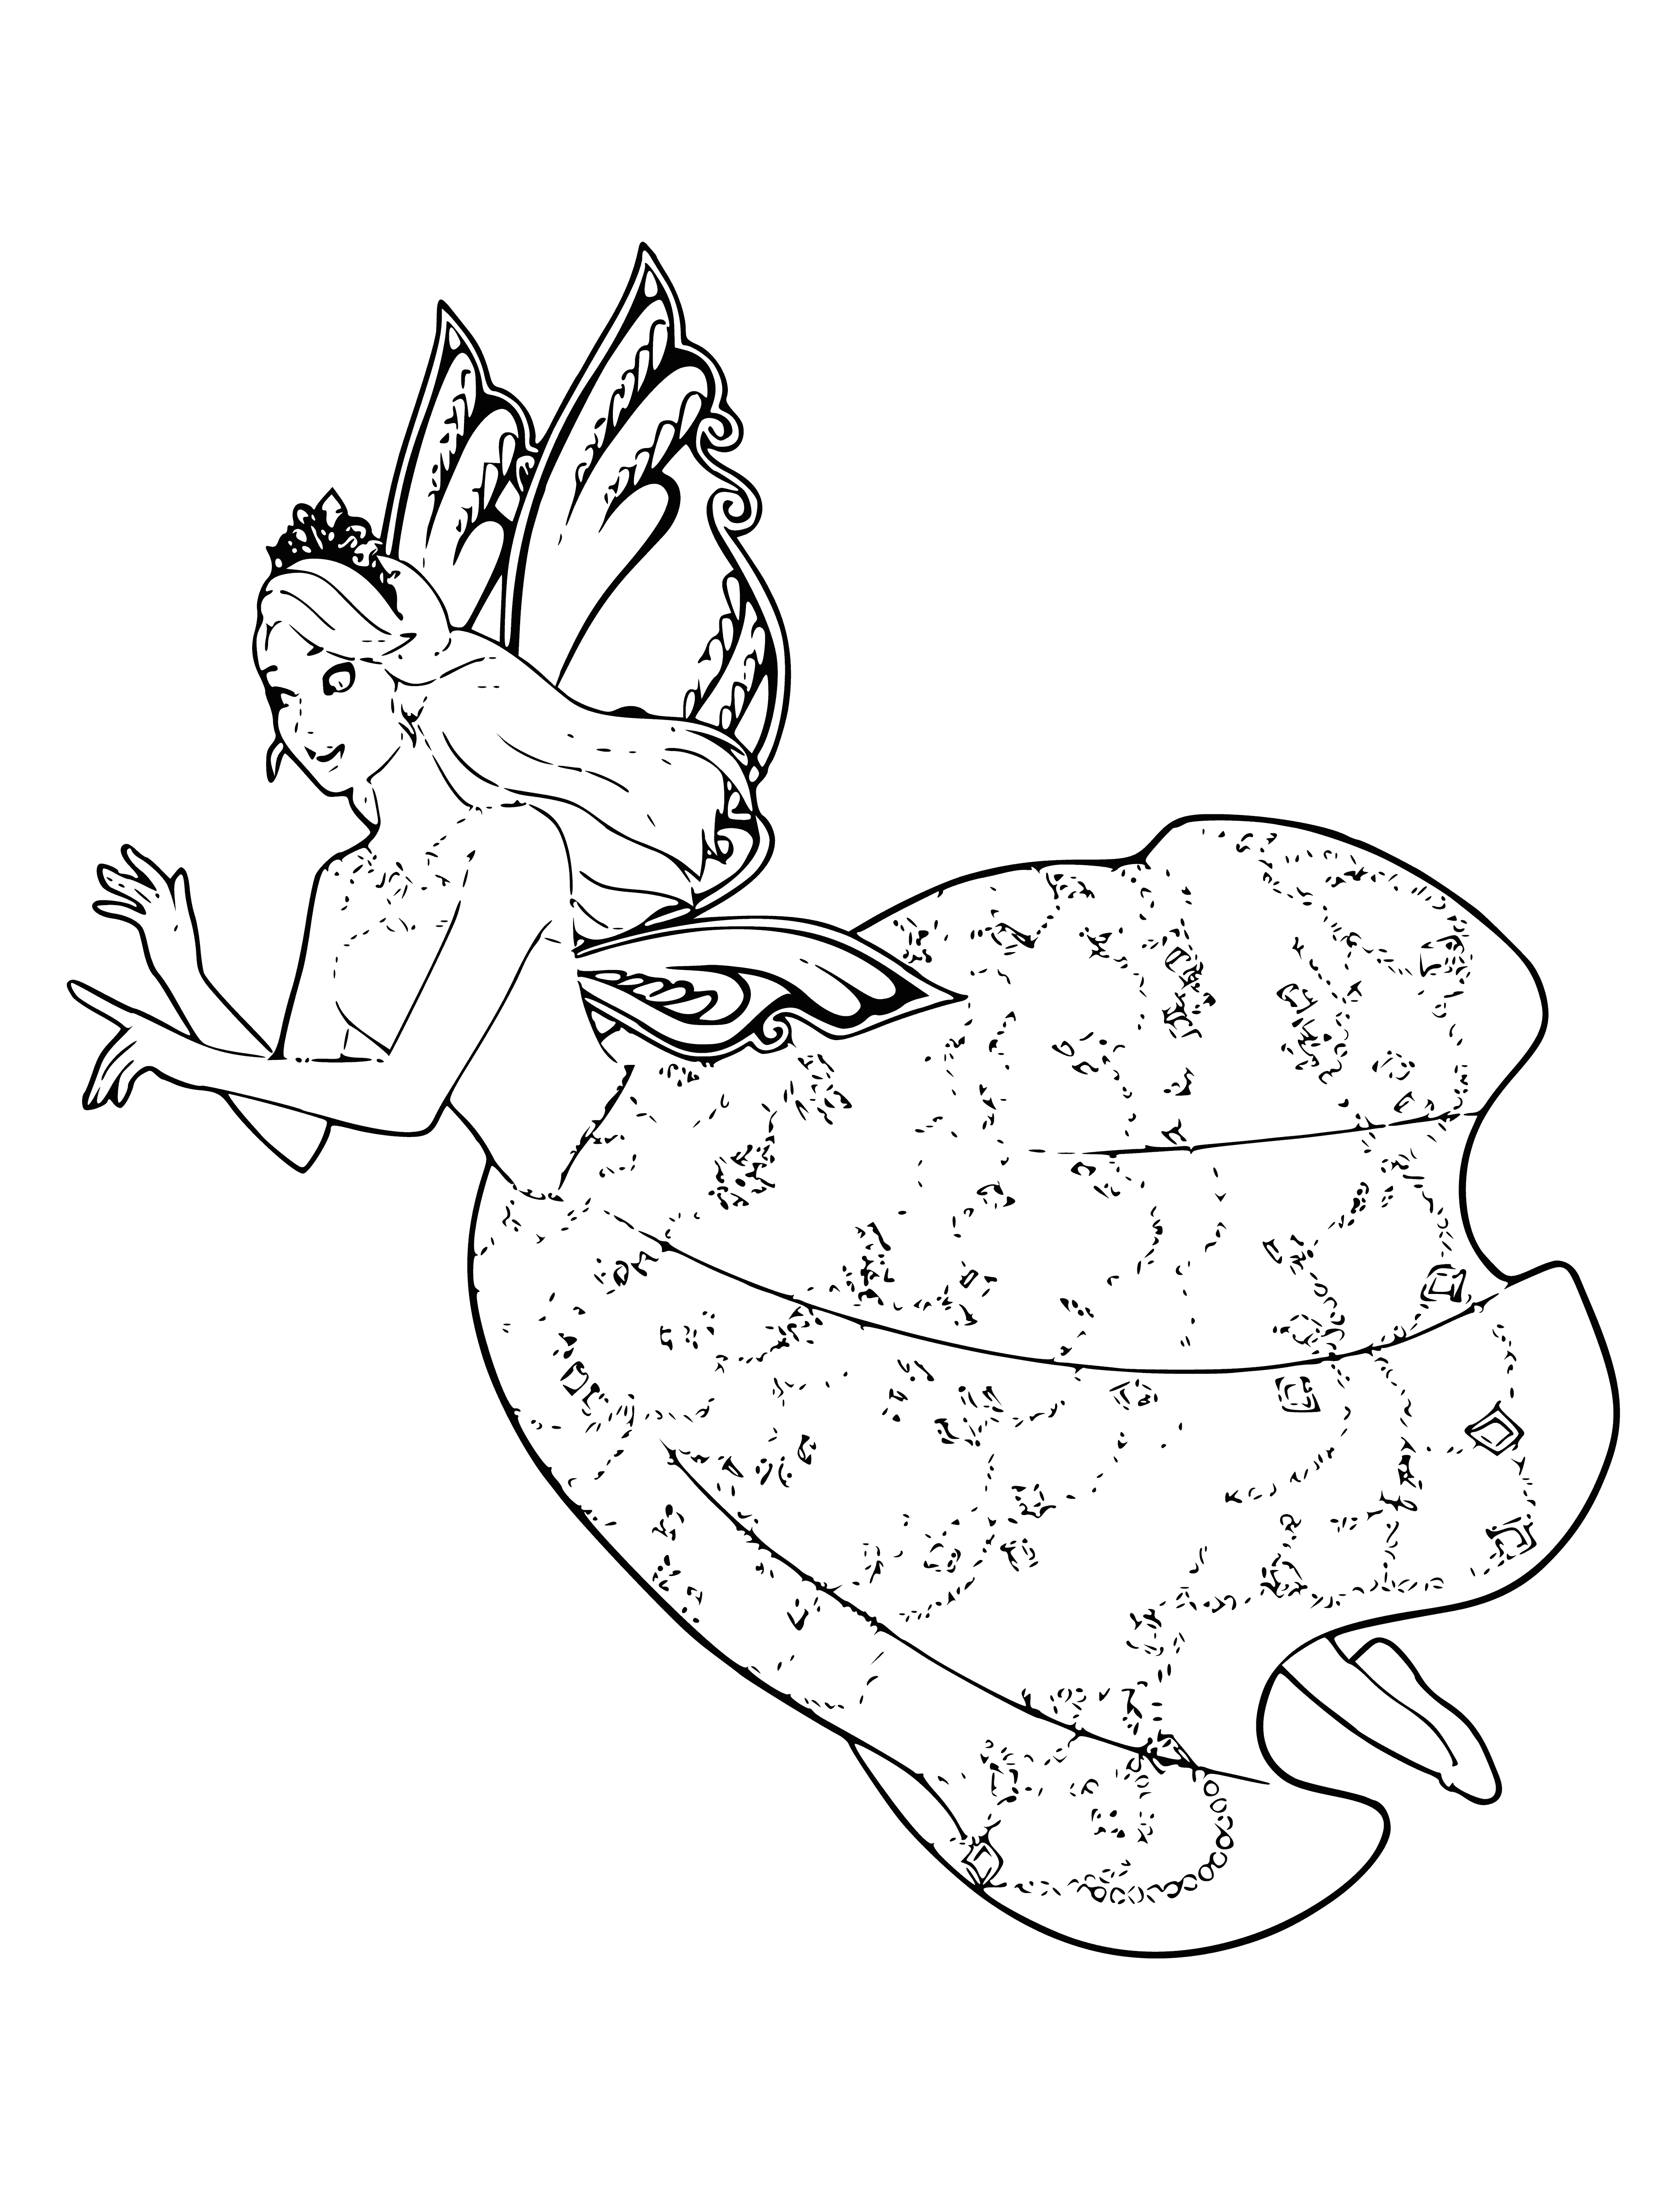 Fairy Catania - Princess of the Glowing Valley coloring page